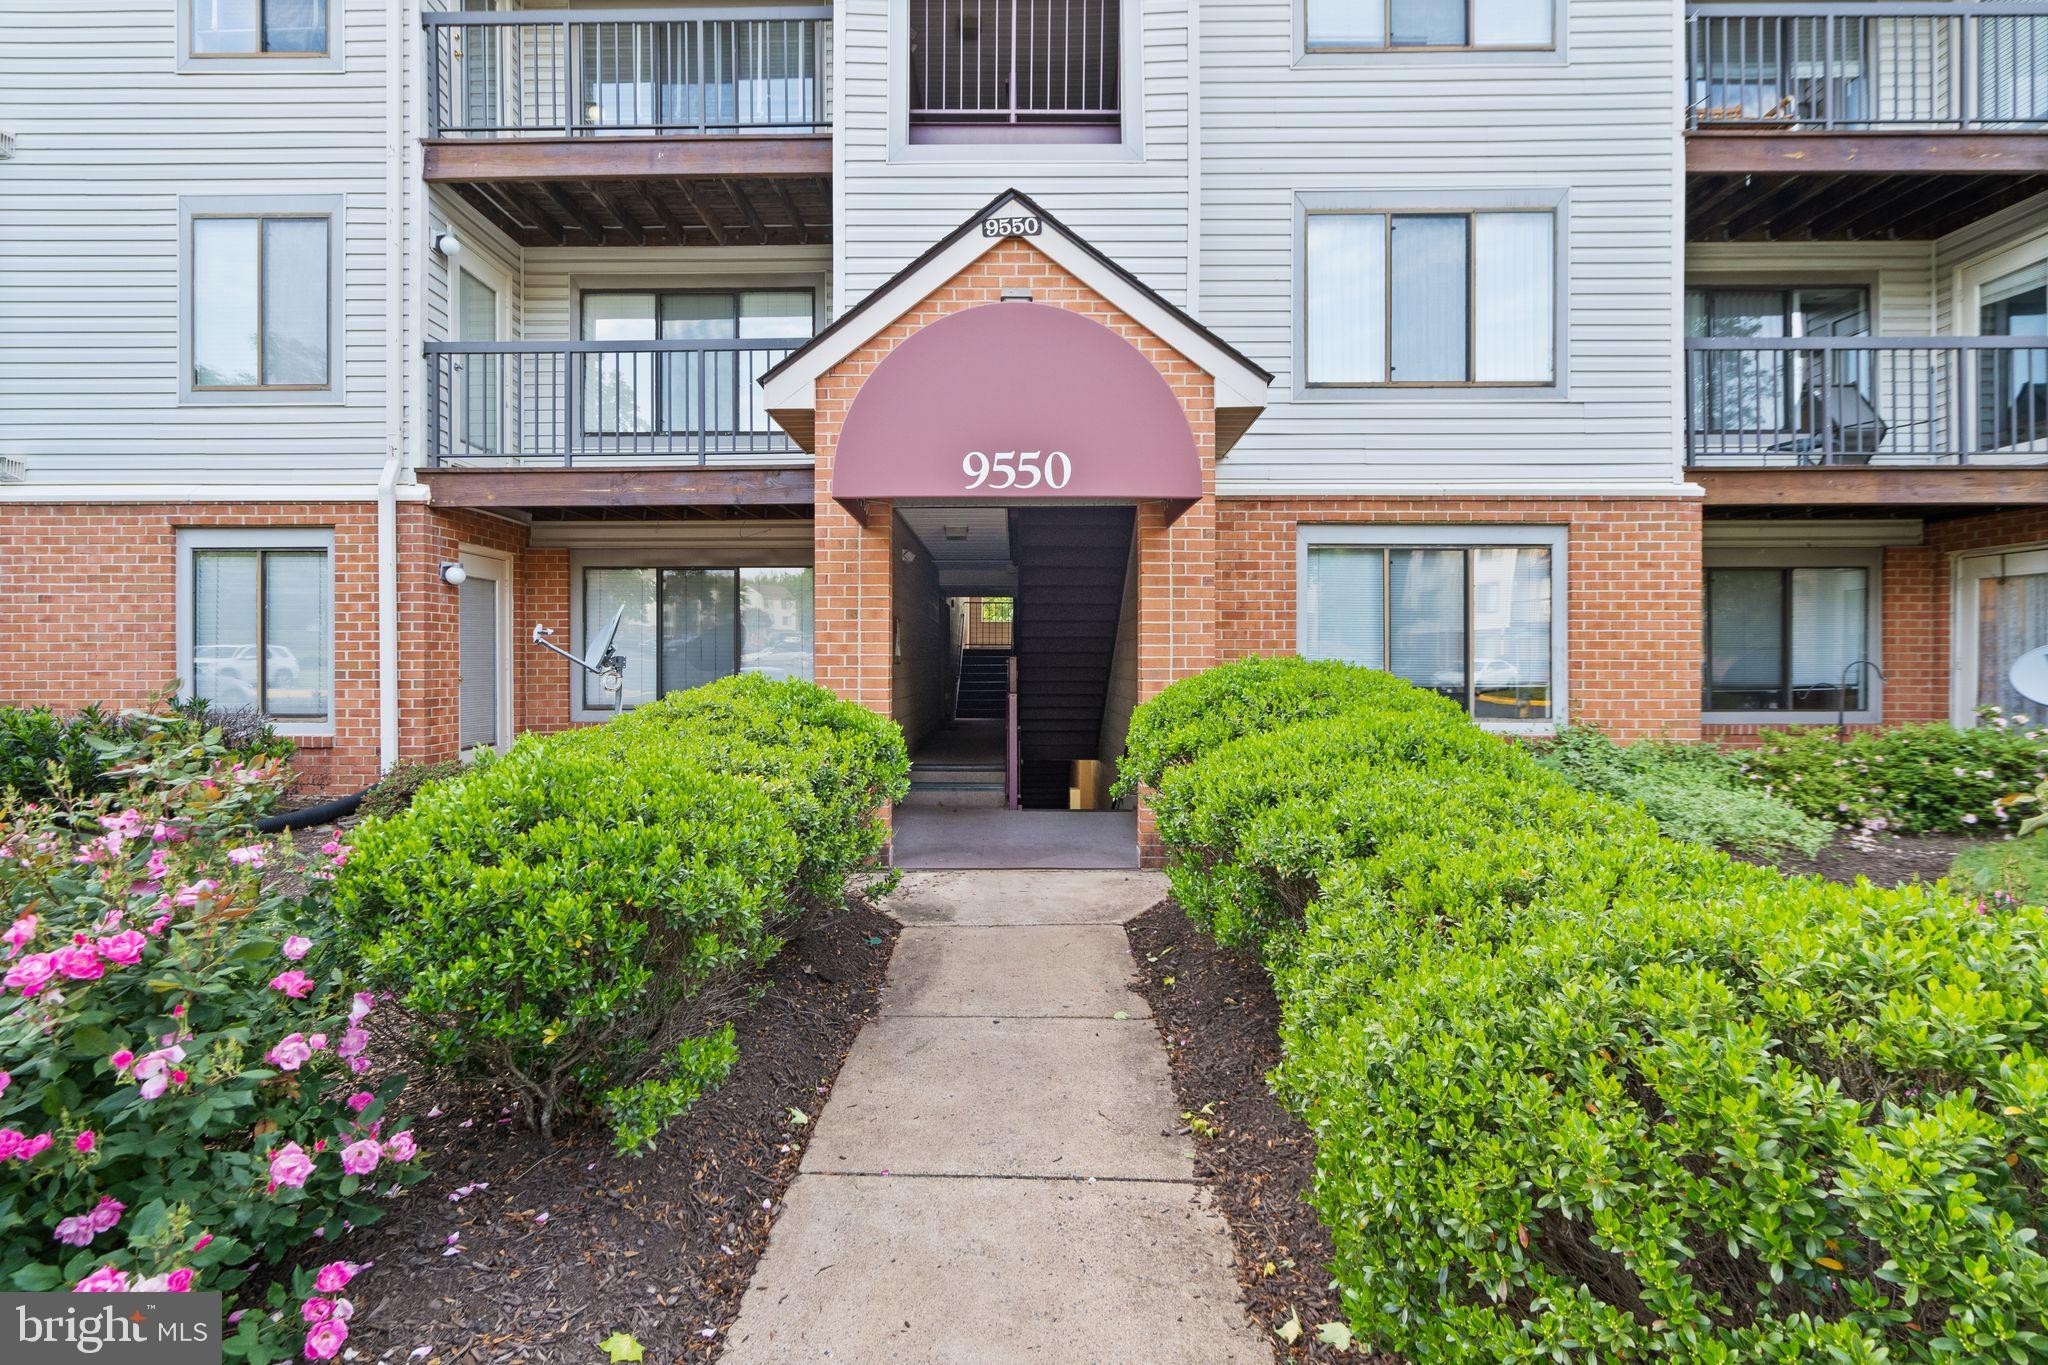 1. 9550 Cannoneer Court